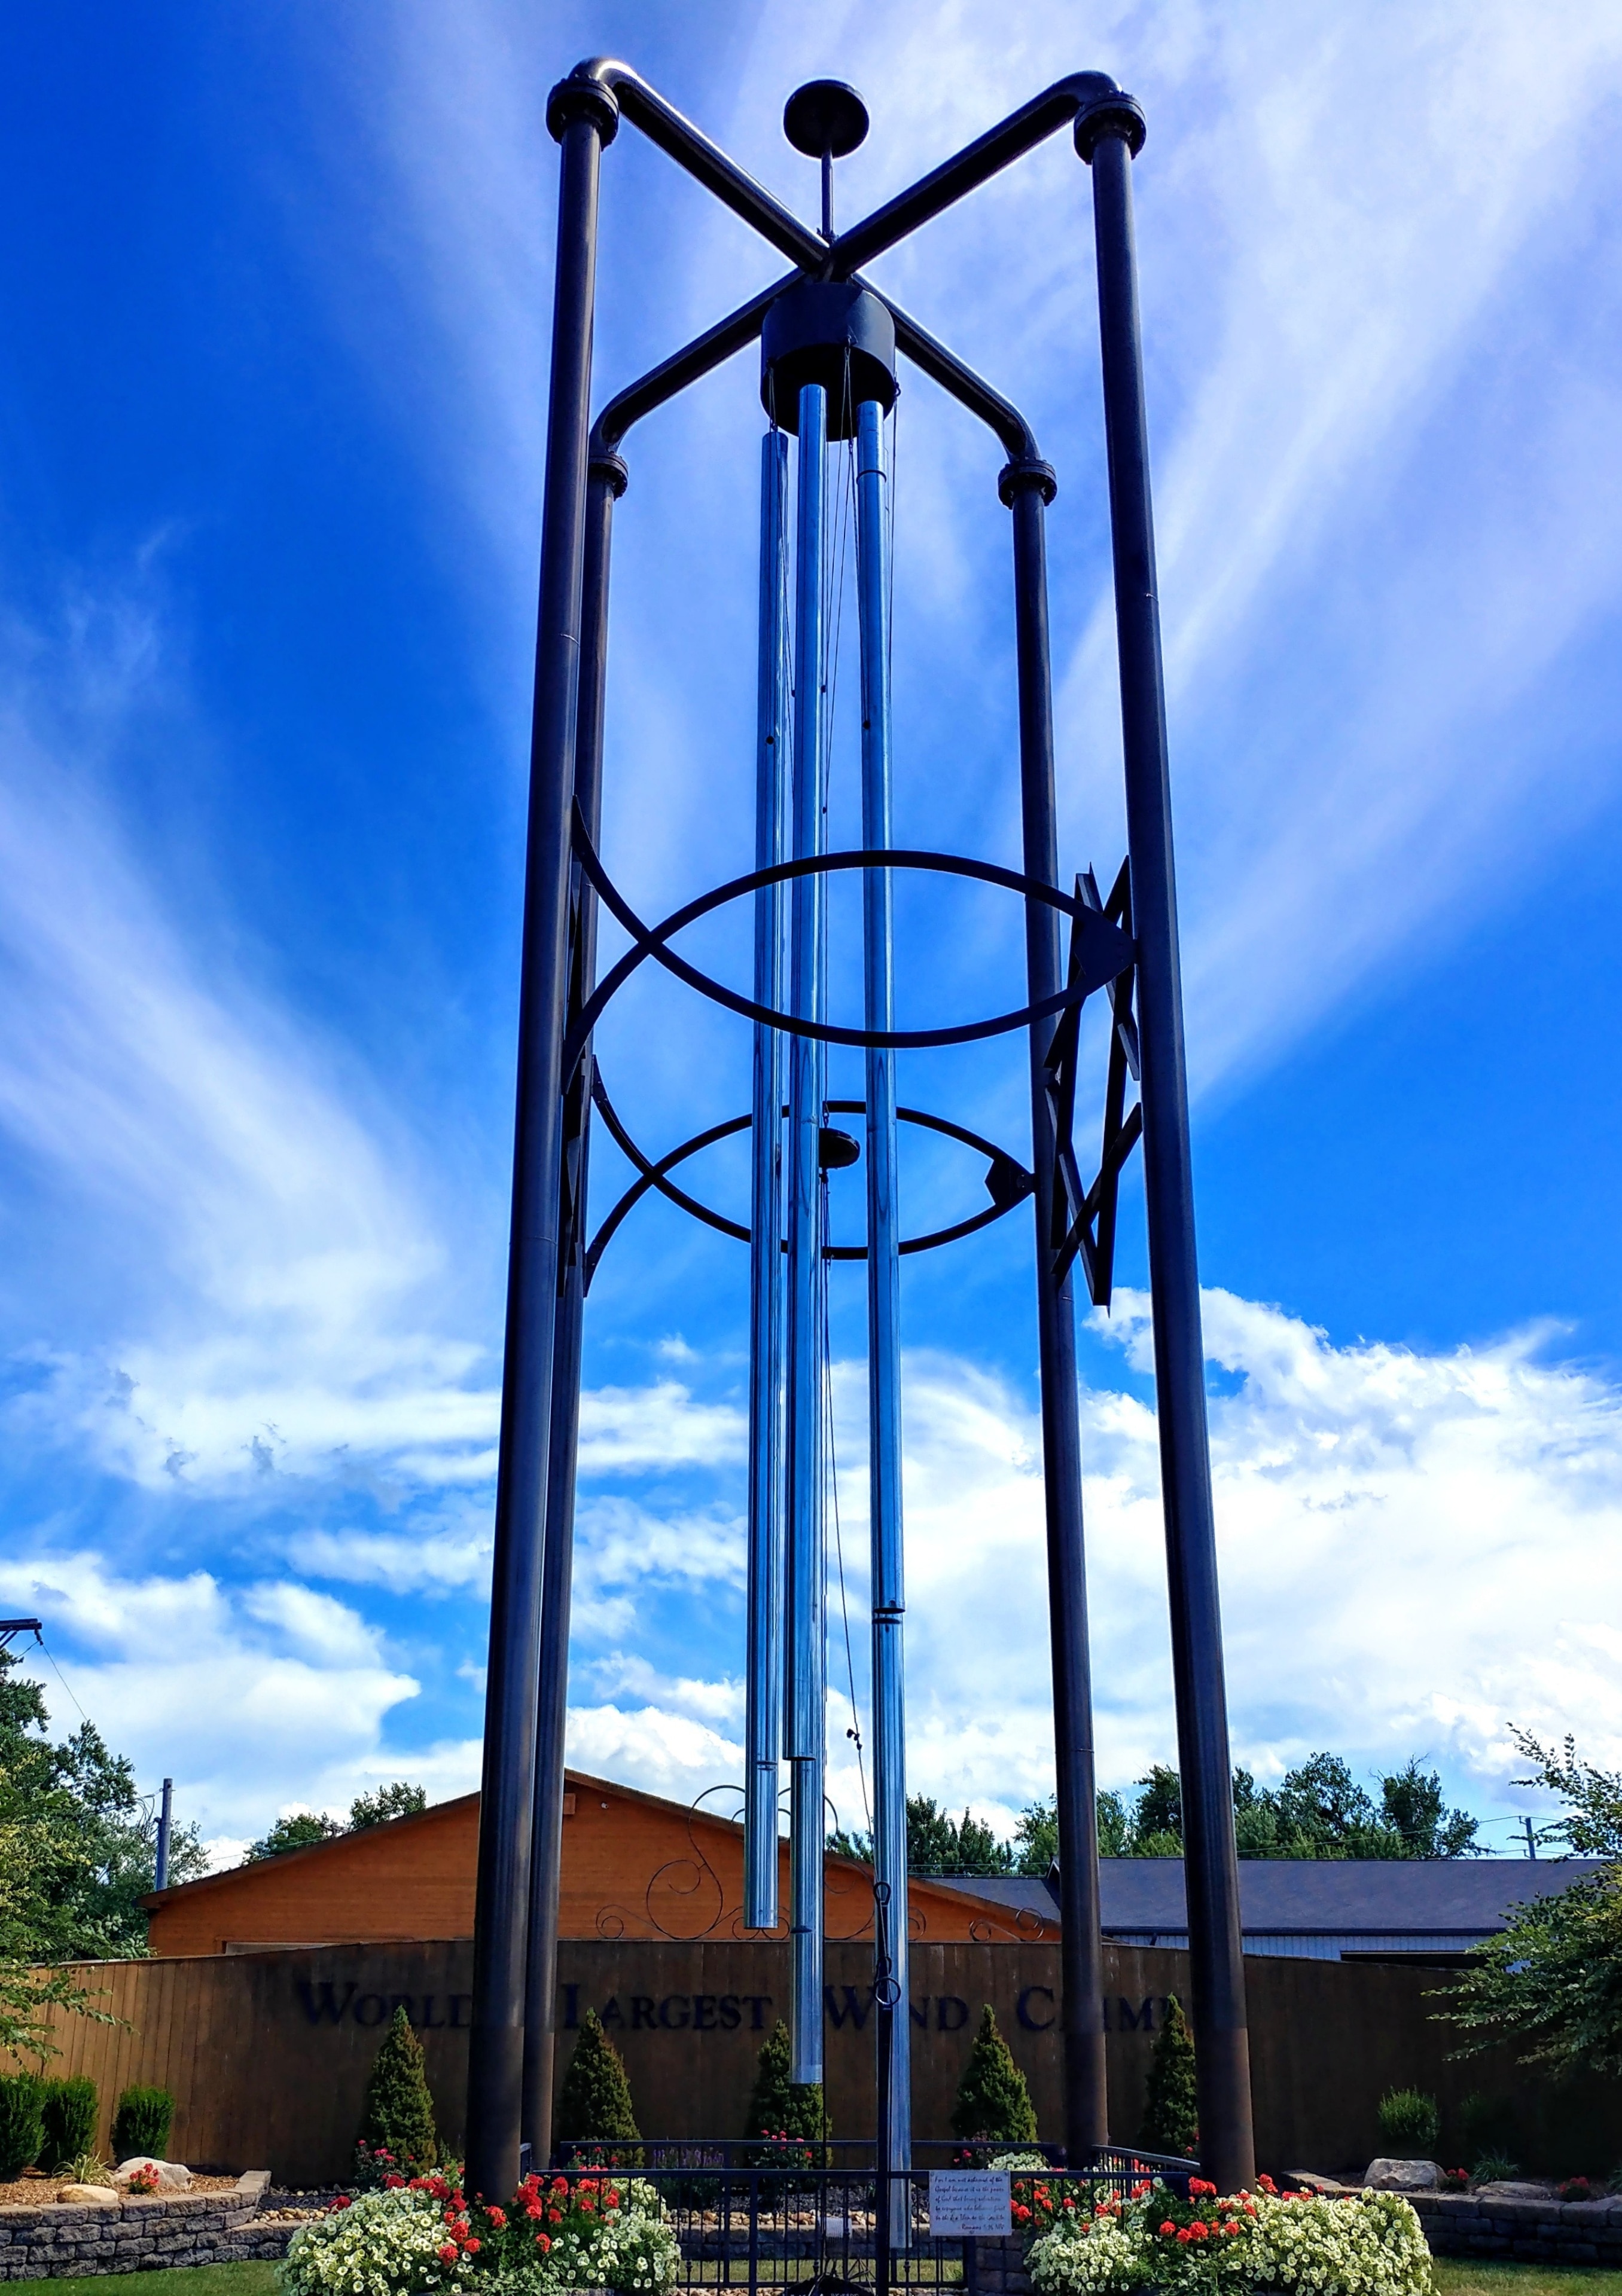 World's largest wind chime!

Casey, Illinois. Big things/small town! Just a short detour off the highway to an oasis of oversized household accoutrements.